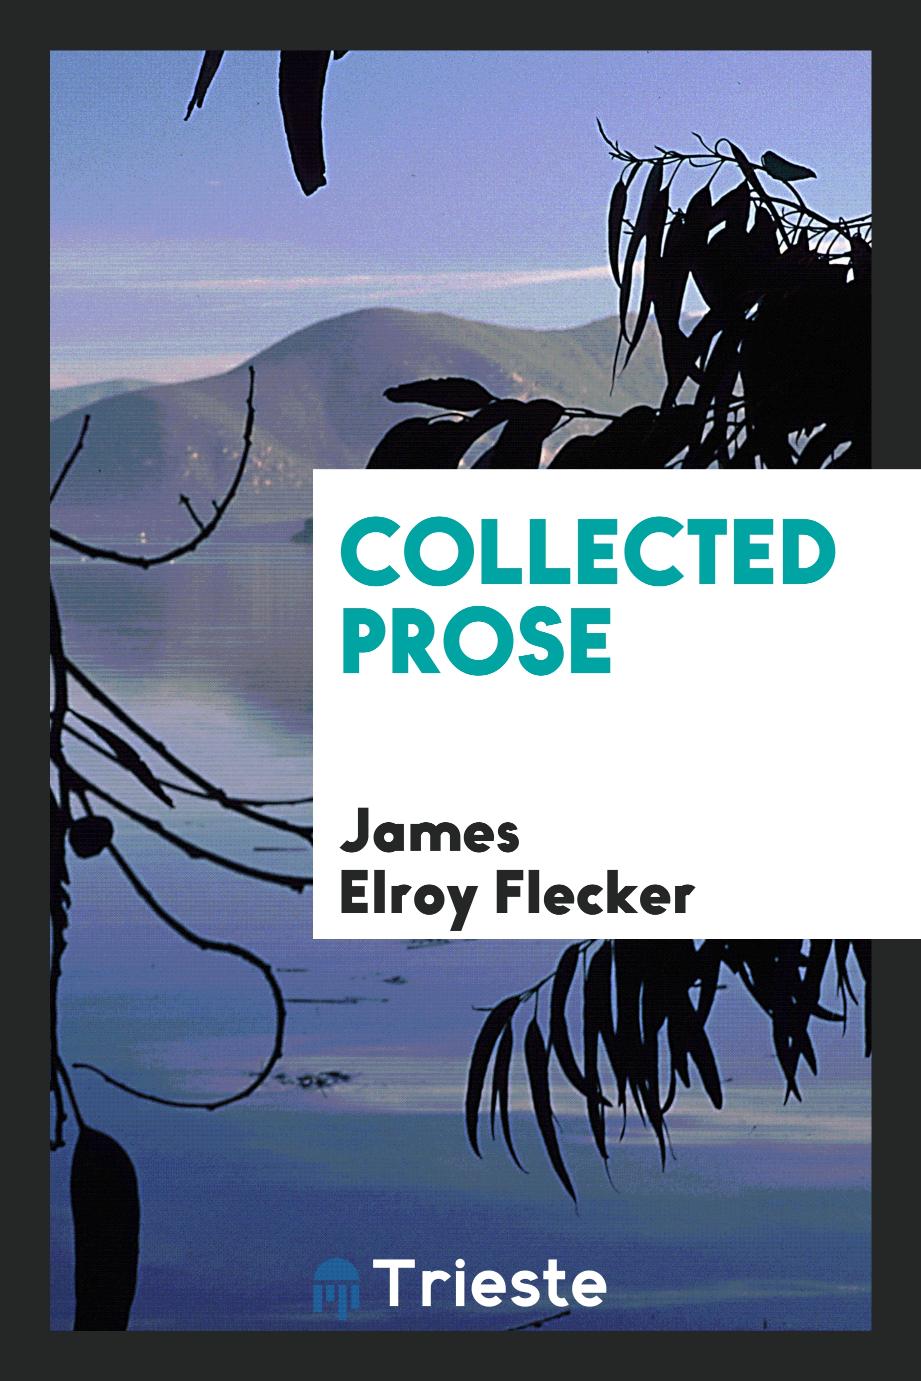 Collected prose